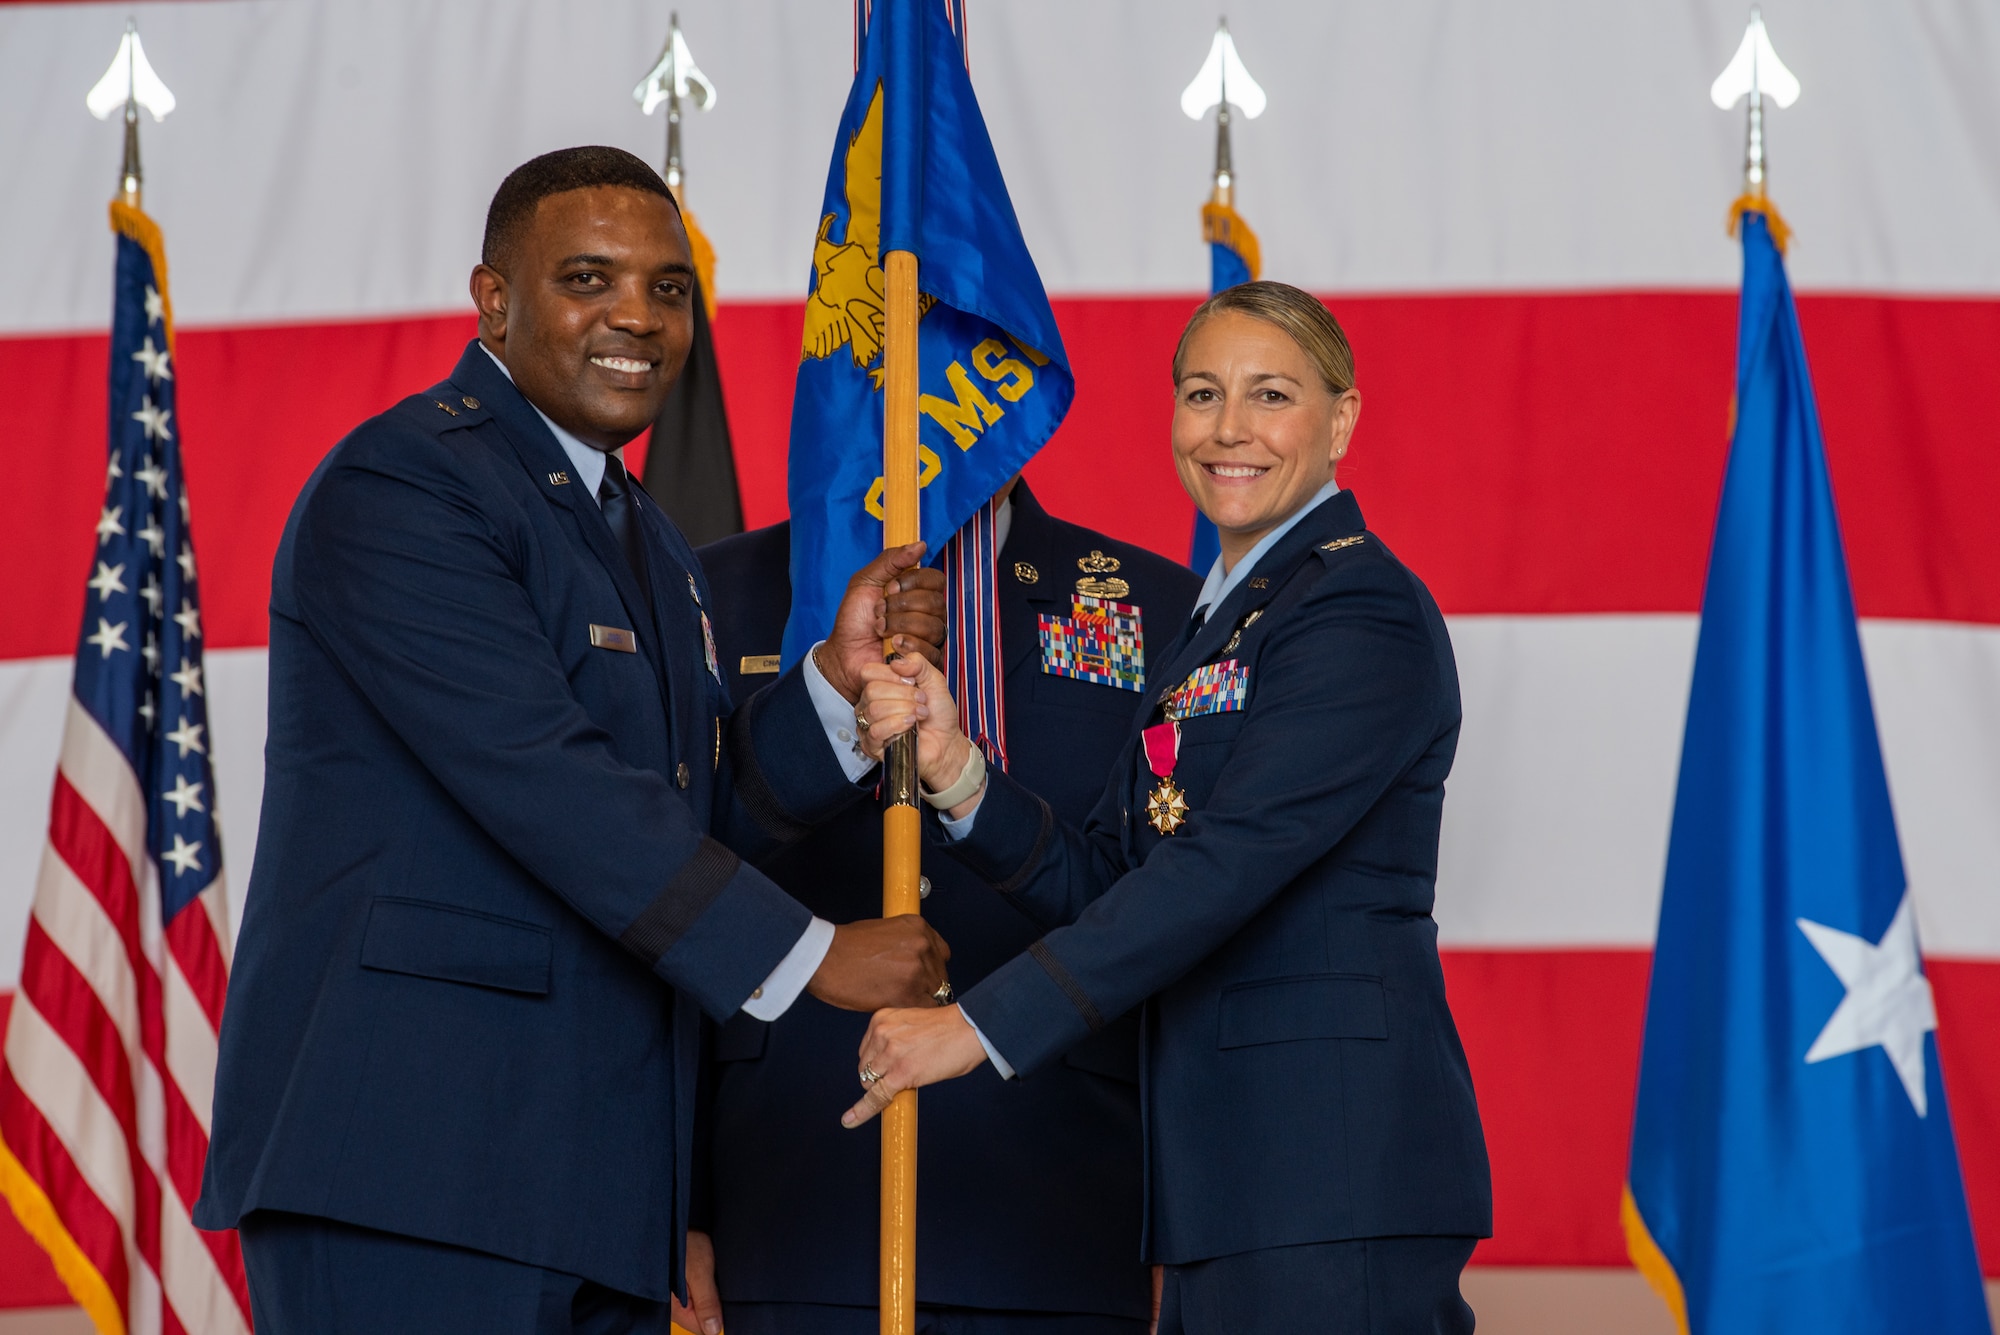 U.S. Air Force Brig. Gen. Otis C. Jones, 86th Airlift Wing commander, presents the guidon to Col. Amy M. Glisson, outgoing 86th Mission Support Group commander, at Ramstein Air Base, Germany, June 9, 2023.